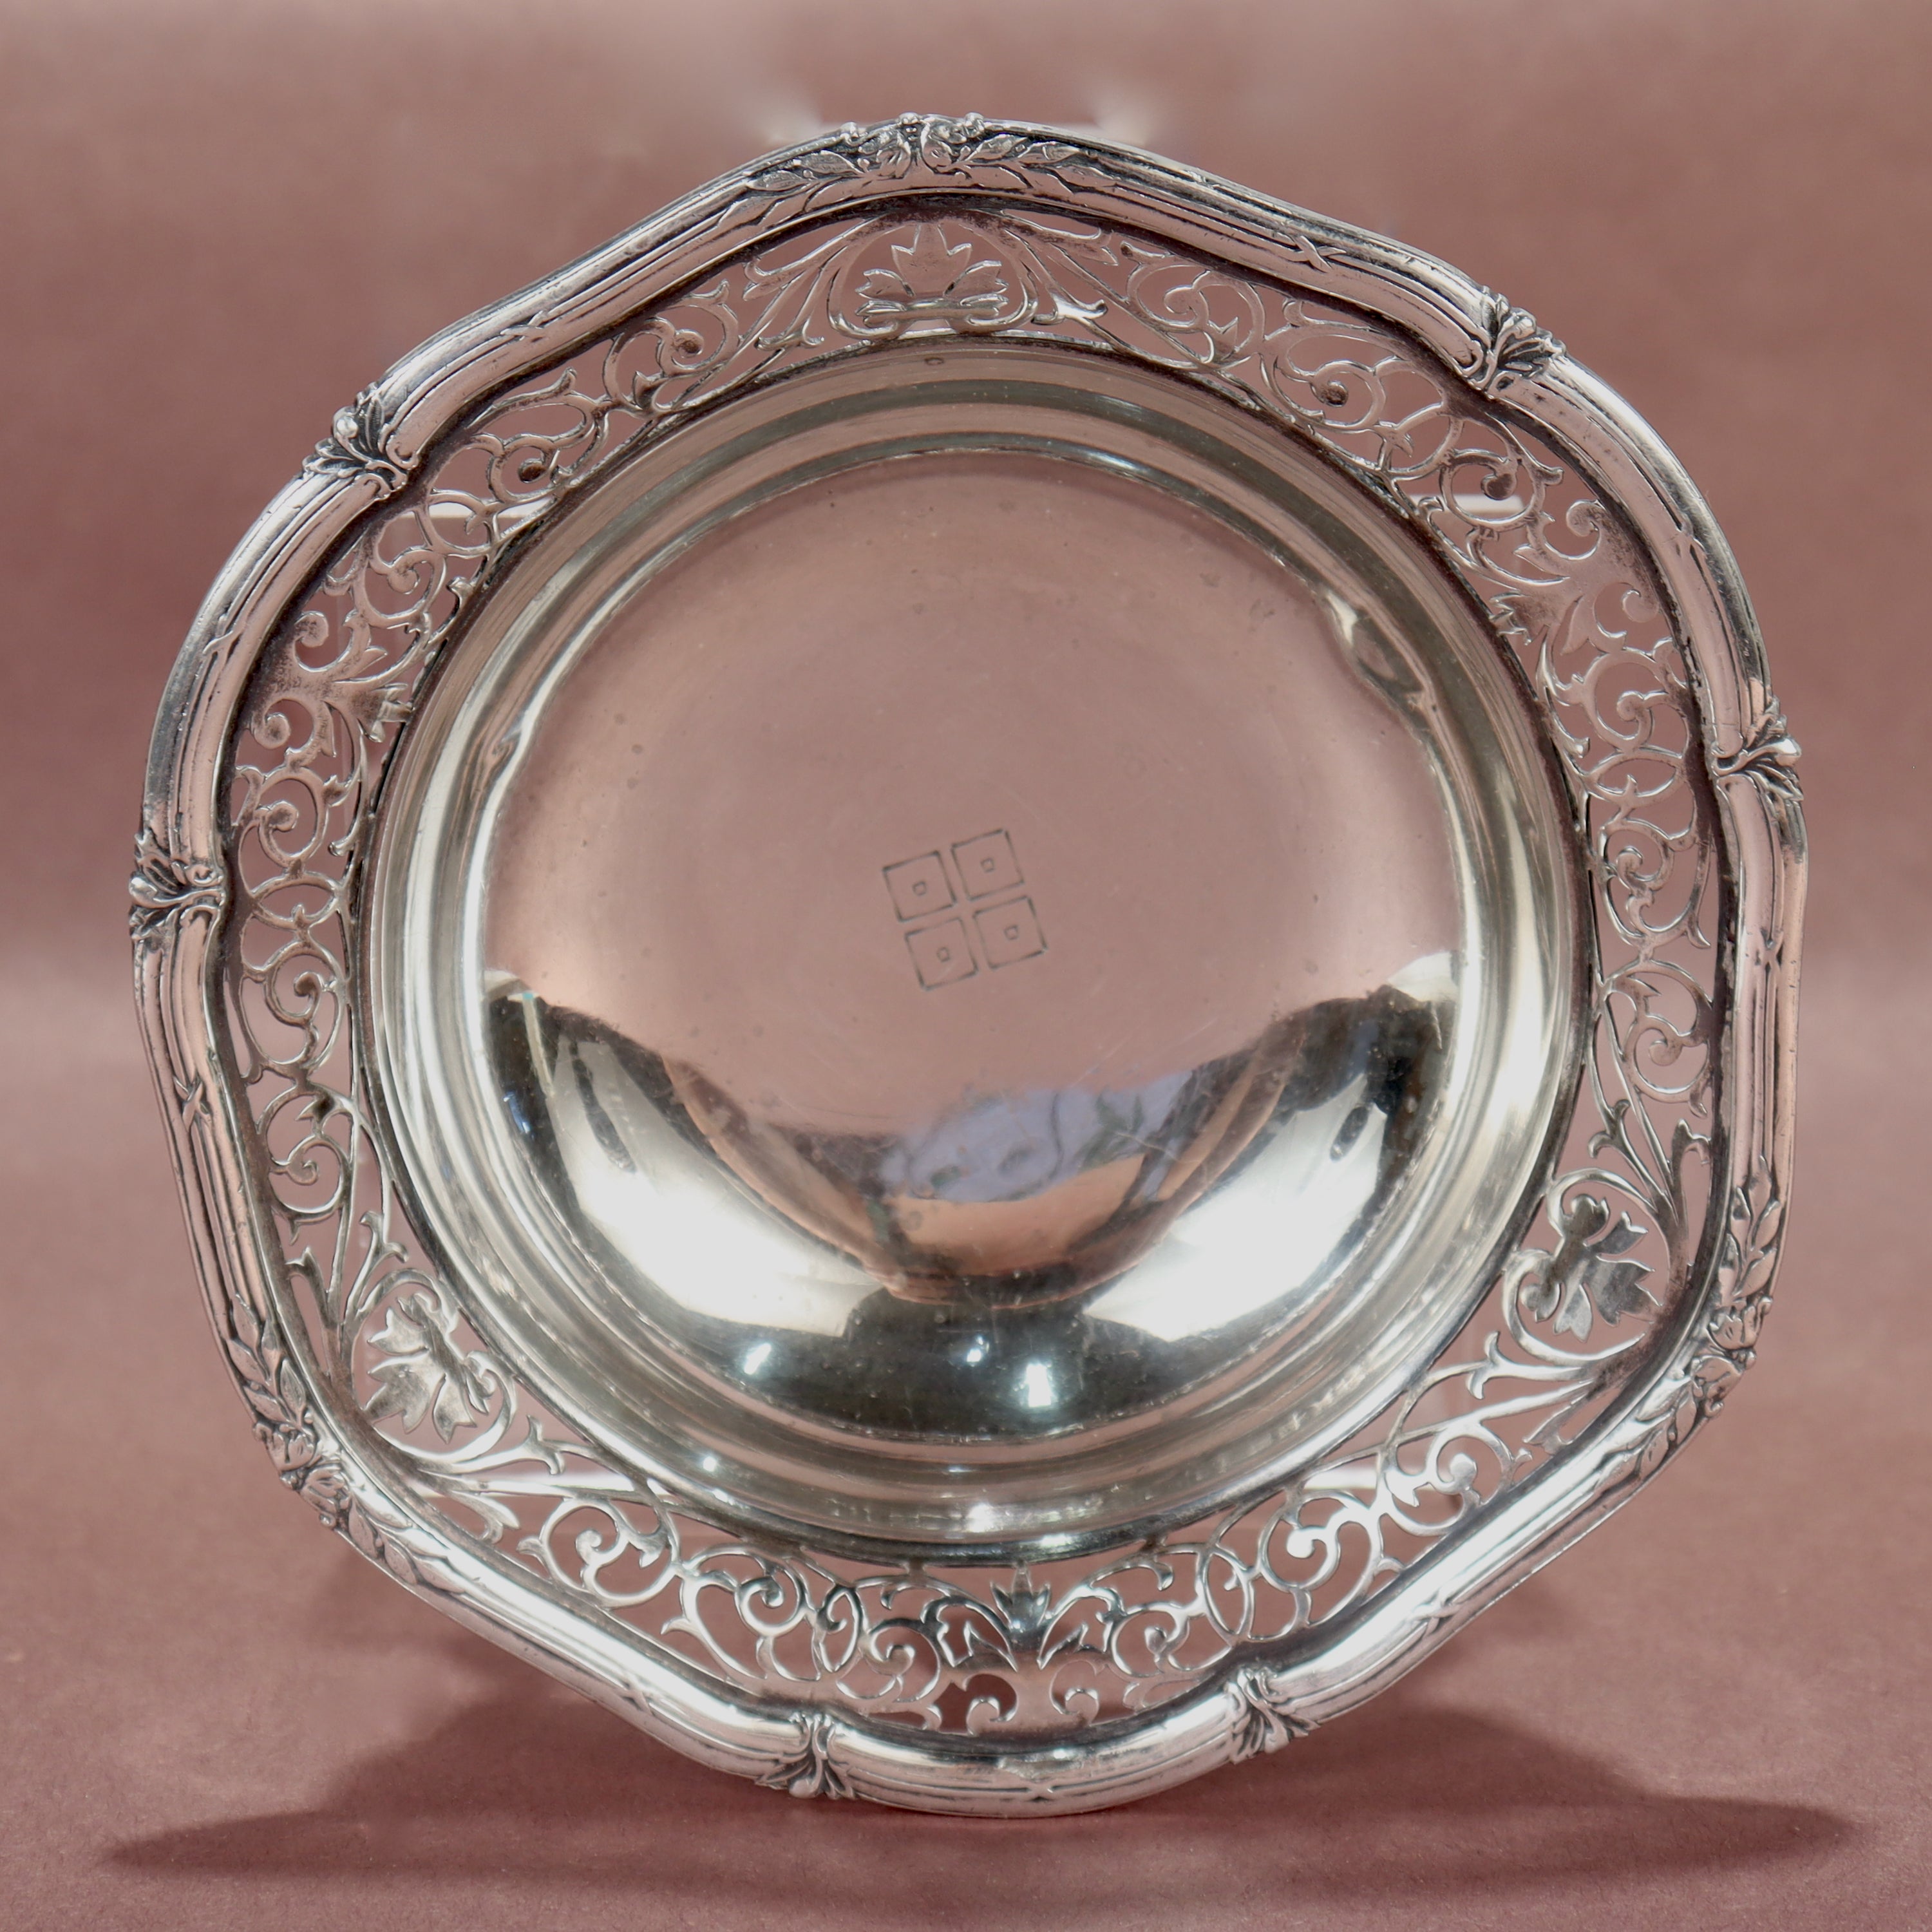 A fine antique sterling silver footed bowl.

By Miyamoto Shoko.

In .950 sterling silver.

With a simple engraved square pattern to the center of the bowl and openwork rim with floral devices supported by 3 feet.

Simply a wonderful Japanese silver